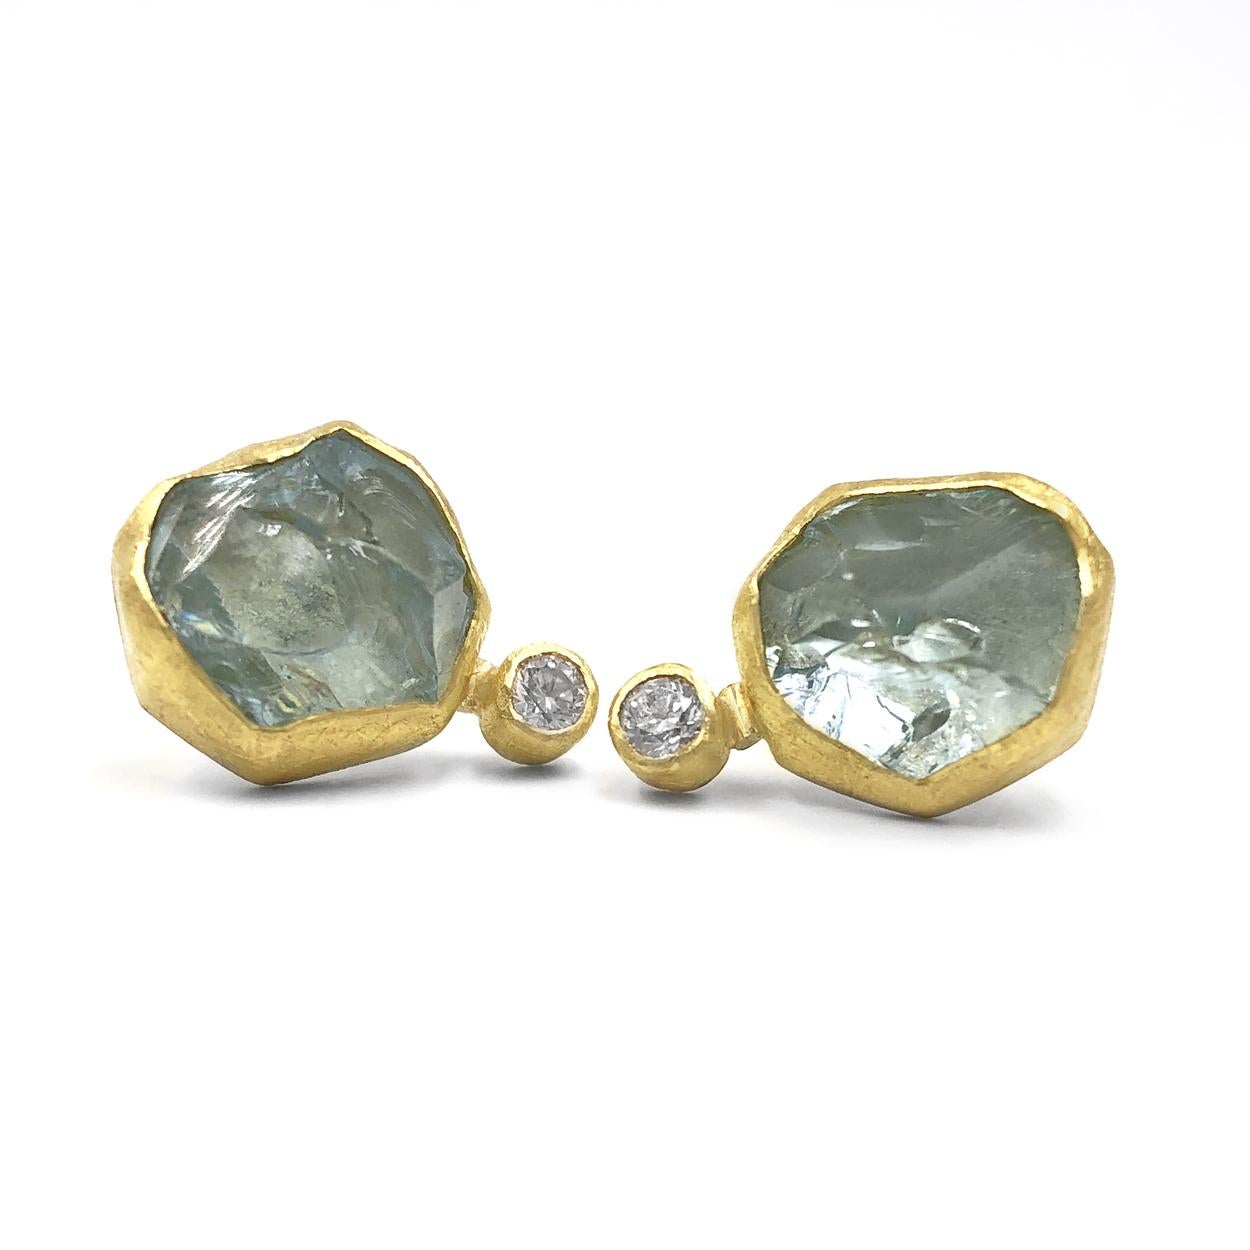 One of a Kind Double Stud Earrings handcrafted by jewelry artist Petra Class in signature-finished 22k yellow gold featuring a pair of aquamarine crystals accented with round brilliant-cut faceted white diamonds and 18k gold posts and backs. Stamped